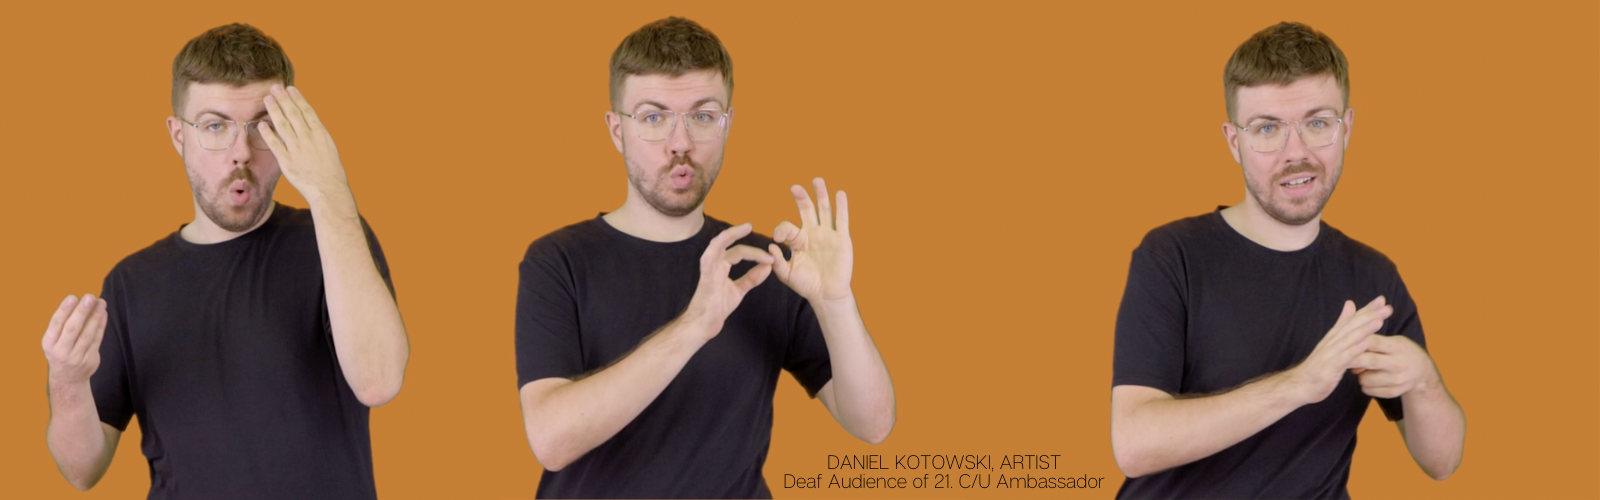 The photo shows a man demonstrating sign language. He is shown in three different poses. Caption: DANIEL KOTOWSKI, ARTIST, 21st C/U Deaf Audience Ambassador. The man has light hair, a light beard, glasses and a black t-shirt. He is against a plain sienna-coloured background.